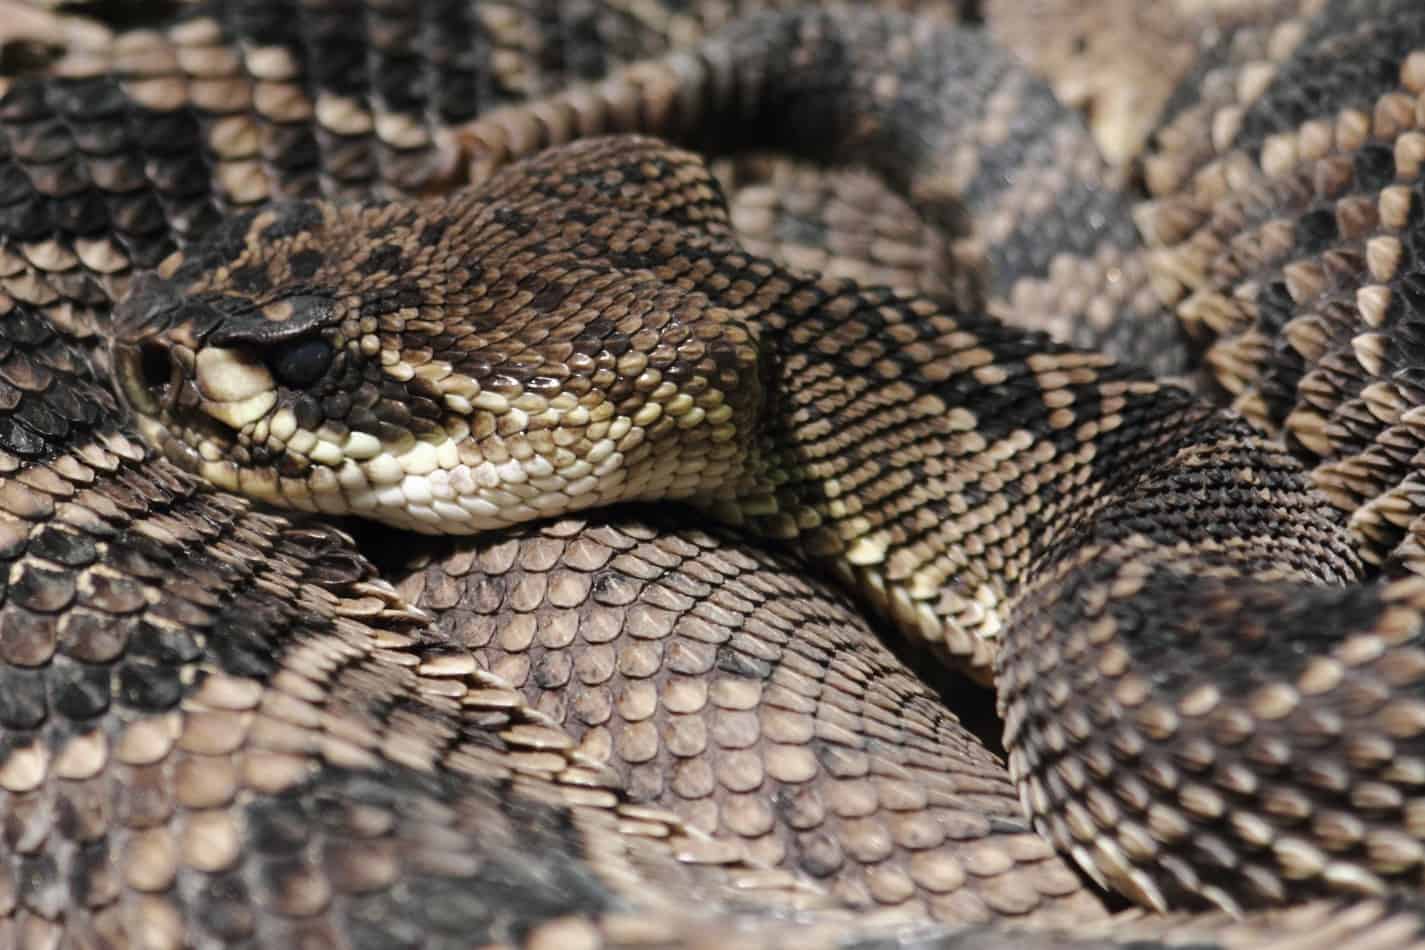 How Long Can Rattlesnakes Live?